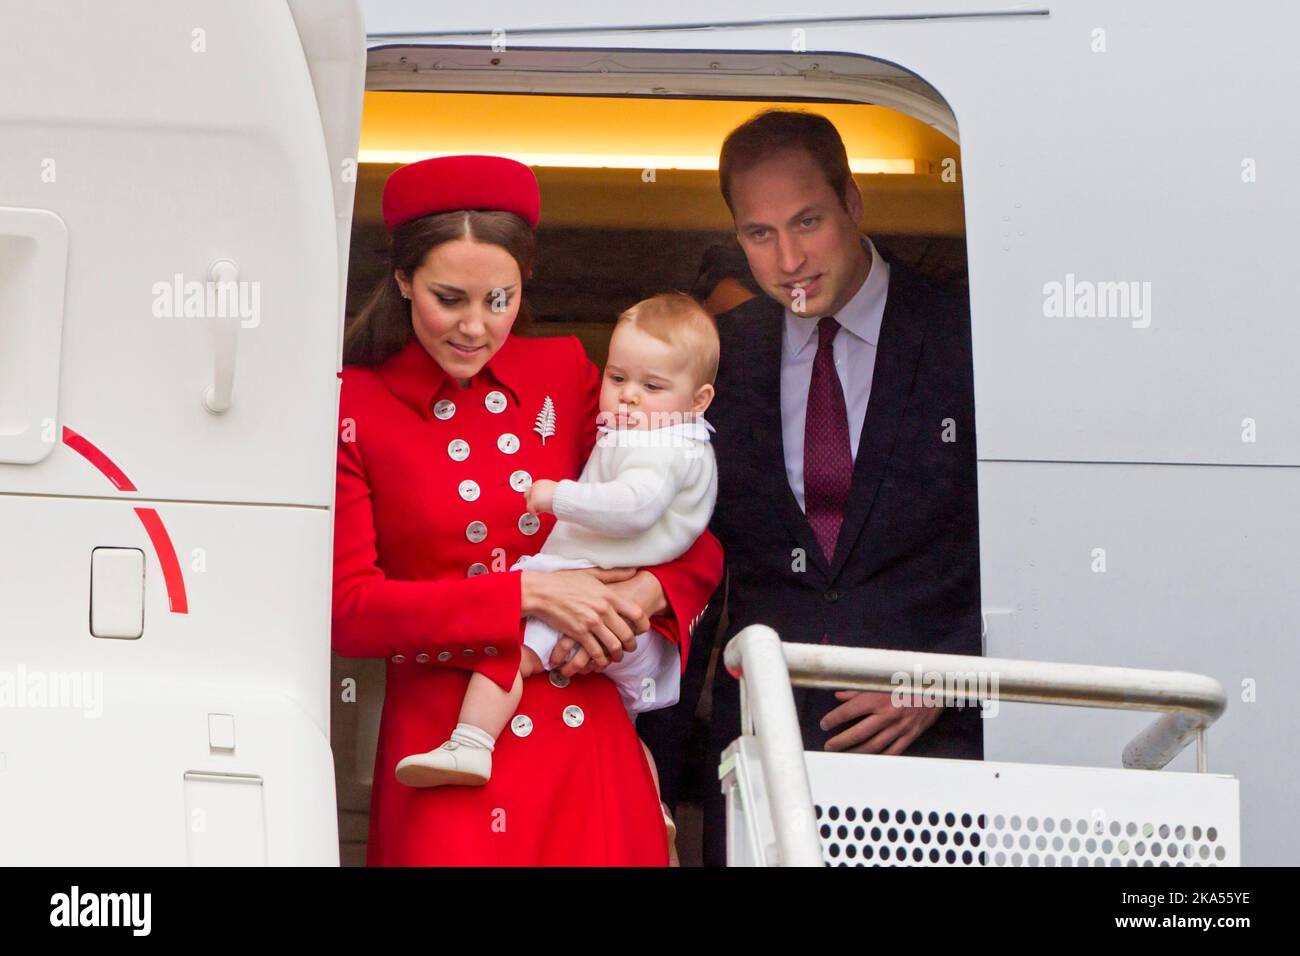 The Duke and Duchess of Cambridge with Prince George arrive at Wellington Military Terminal, Wellington, New Zealand, Monday, April 07, 2014. Stock Photo